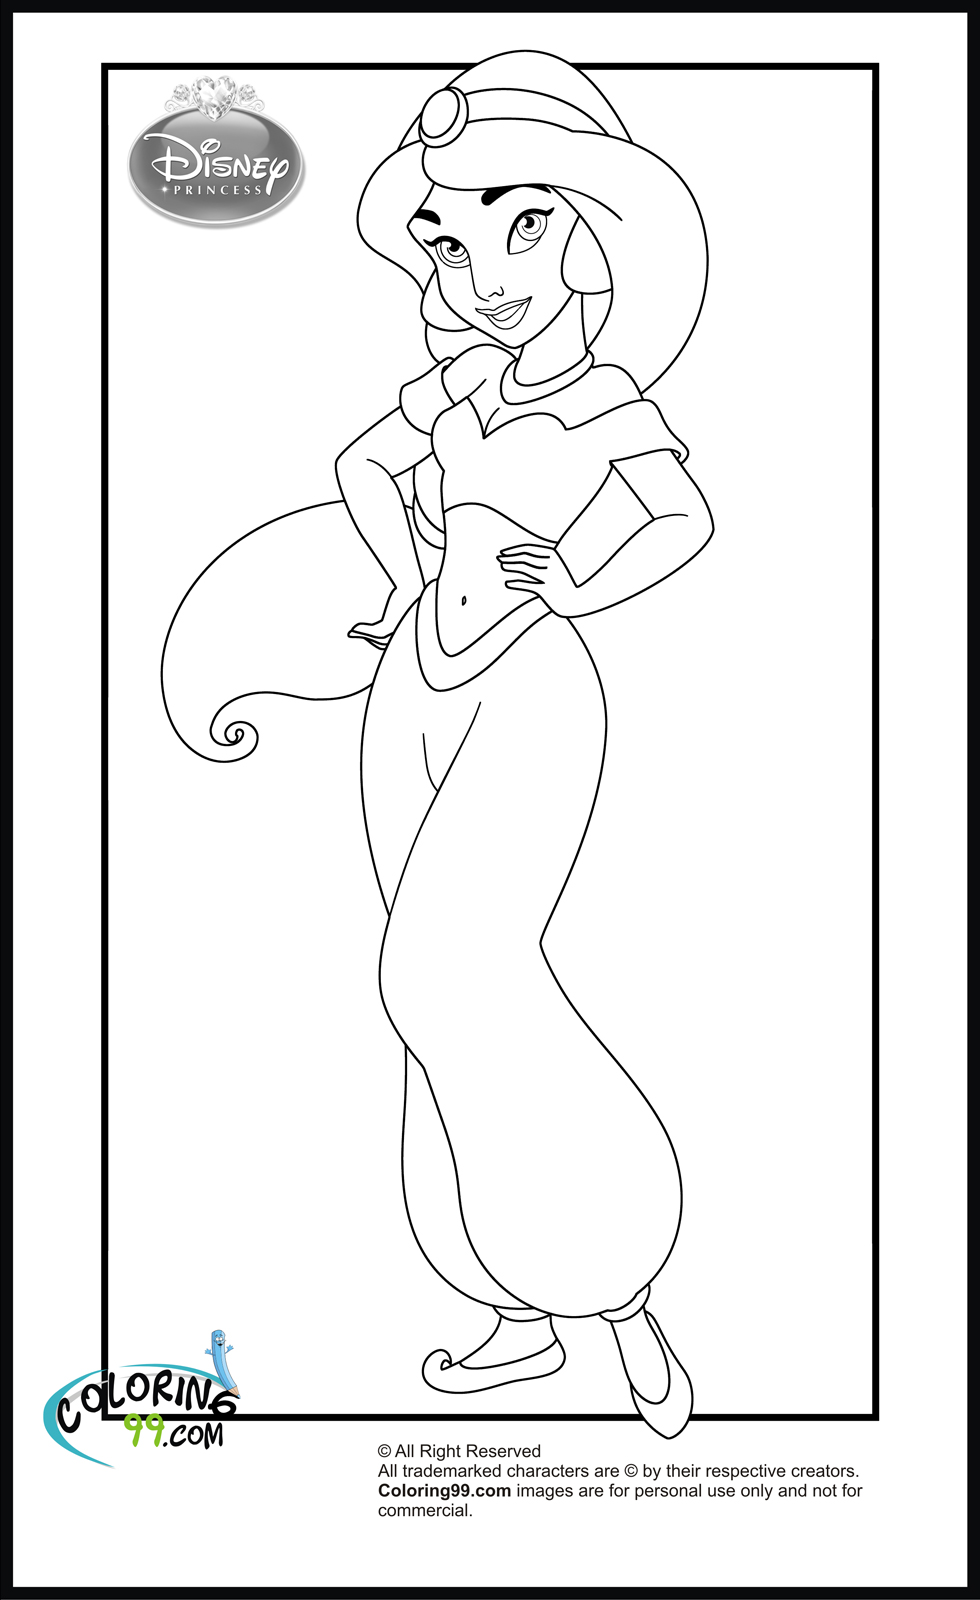 Download Coloring Pages Of Disney Princess - 288+ SVG File for Silhouette for Cricut, Silhouette and Other Machine